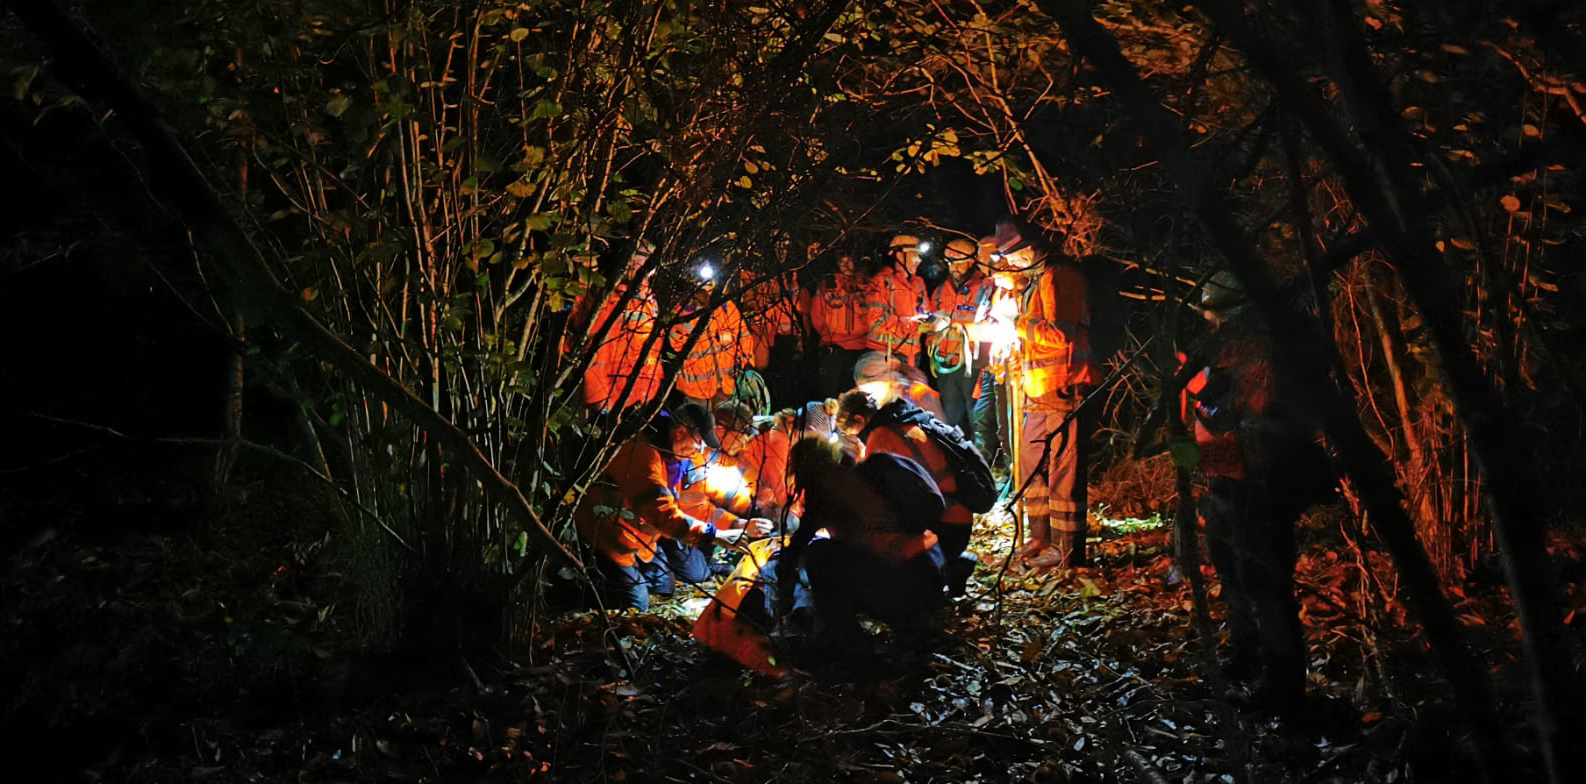 Searchers in the woods at night